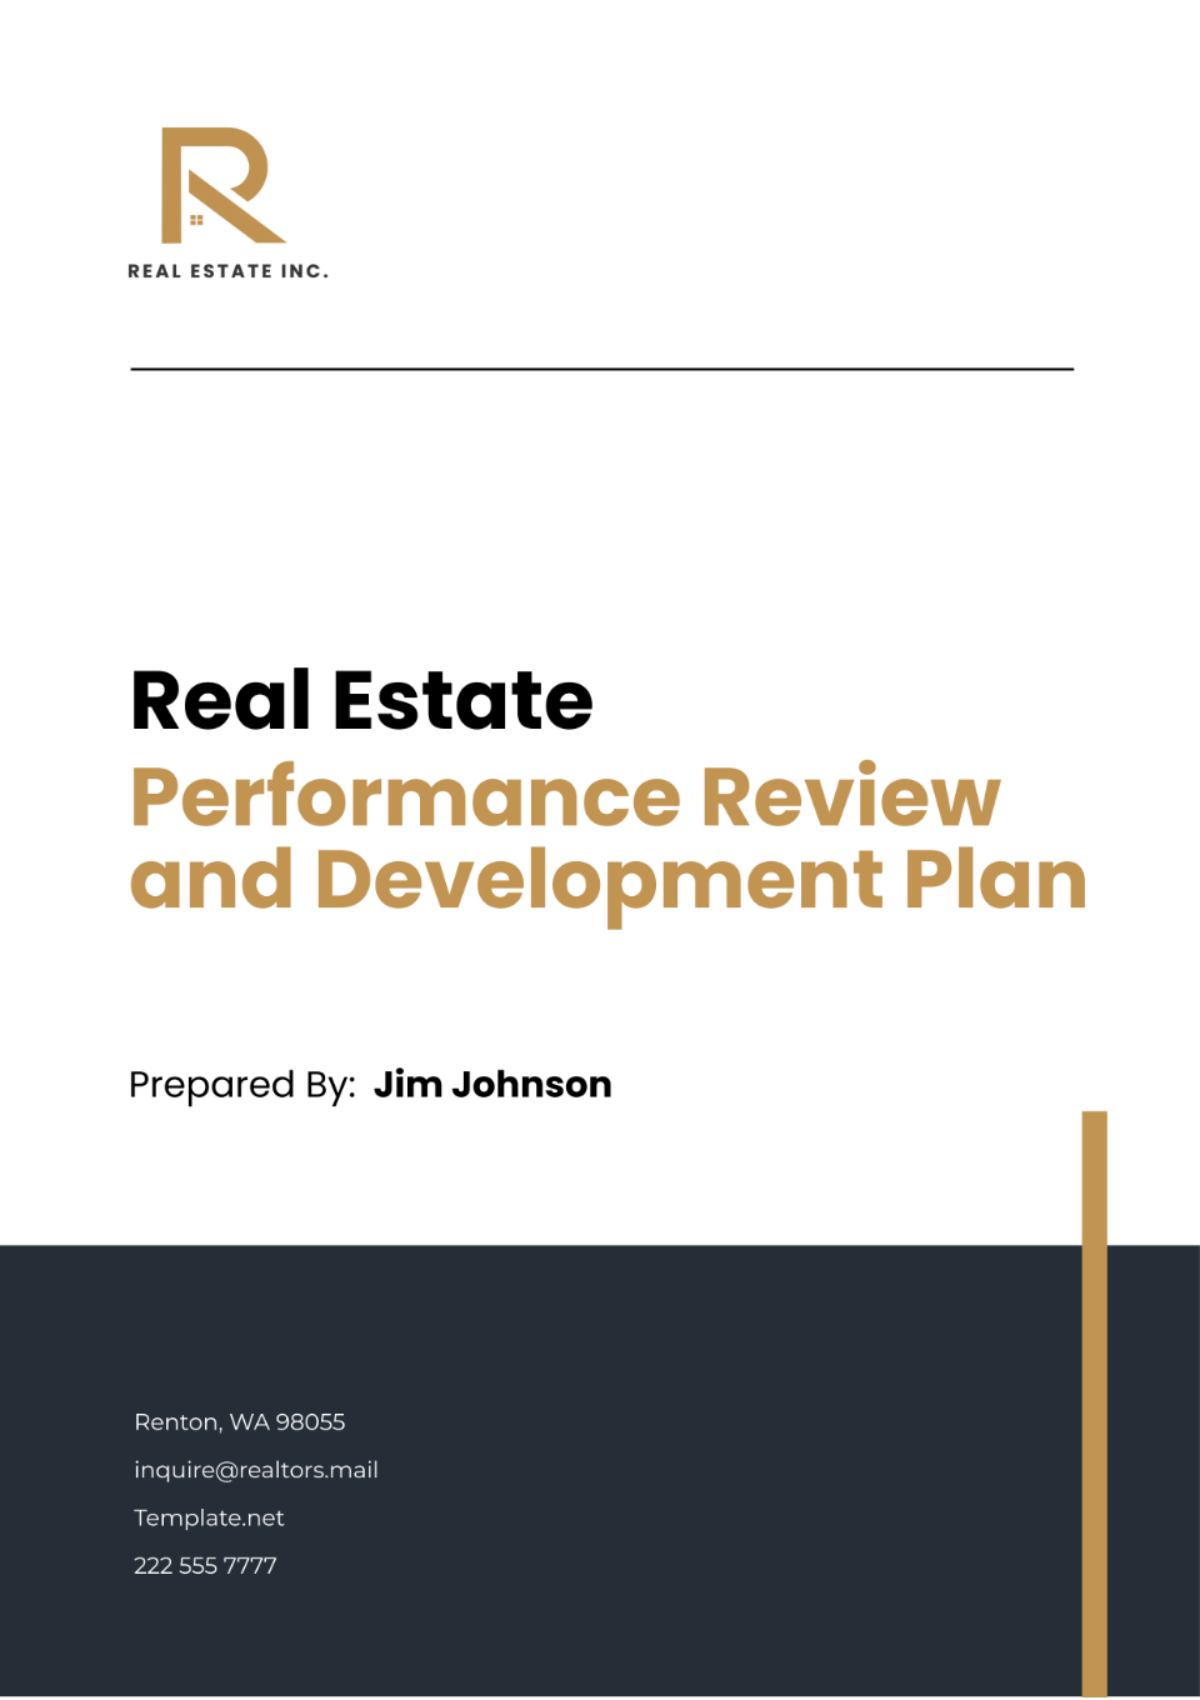 Free Real Estate Performance Review and Development Plan Template